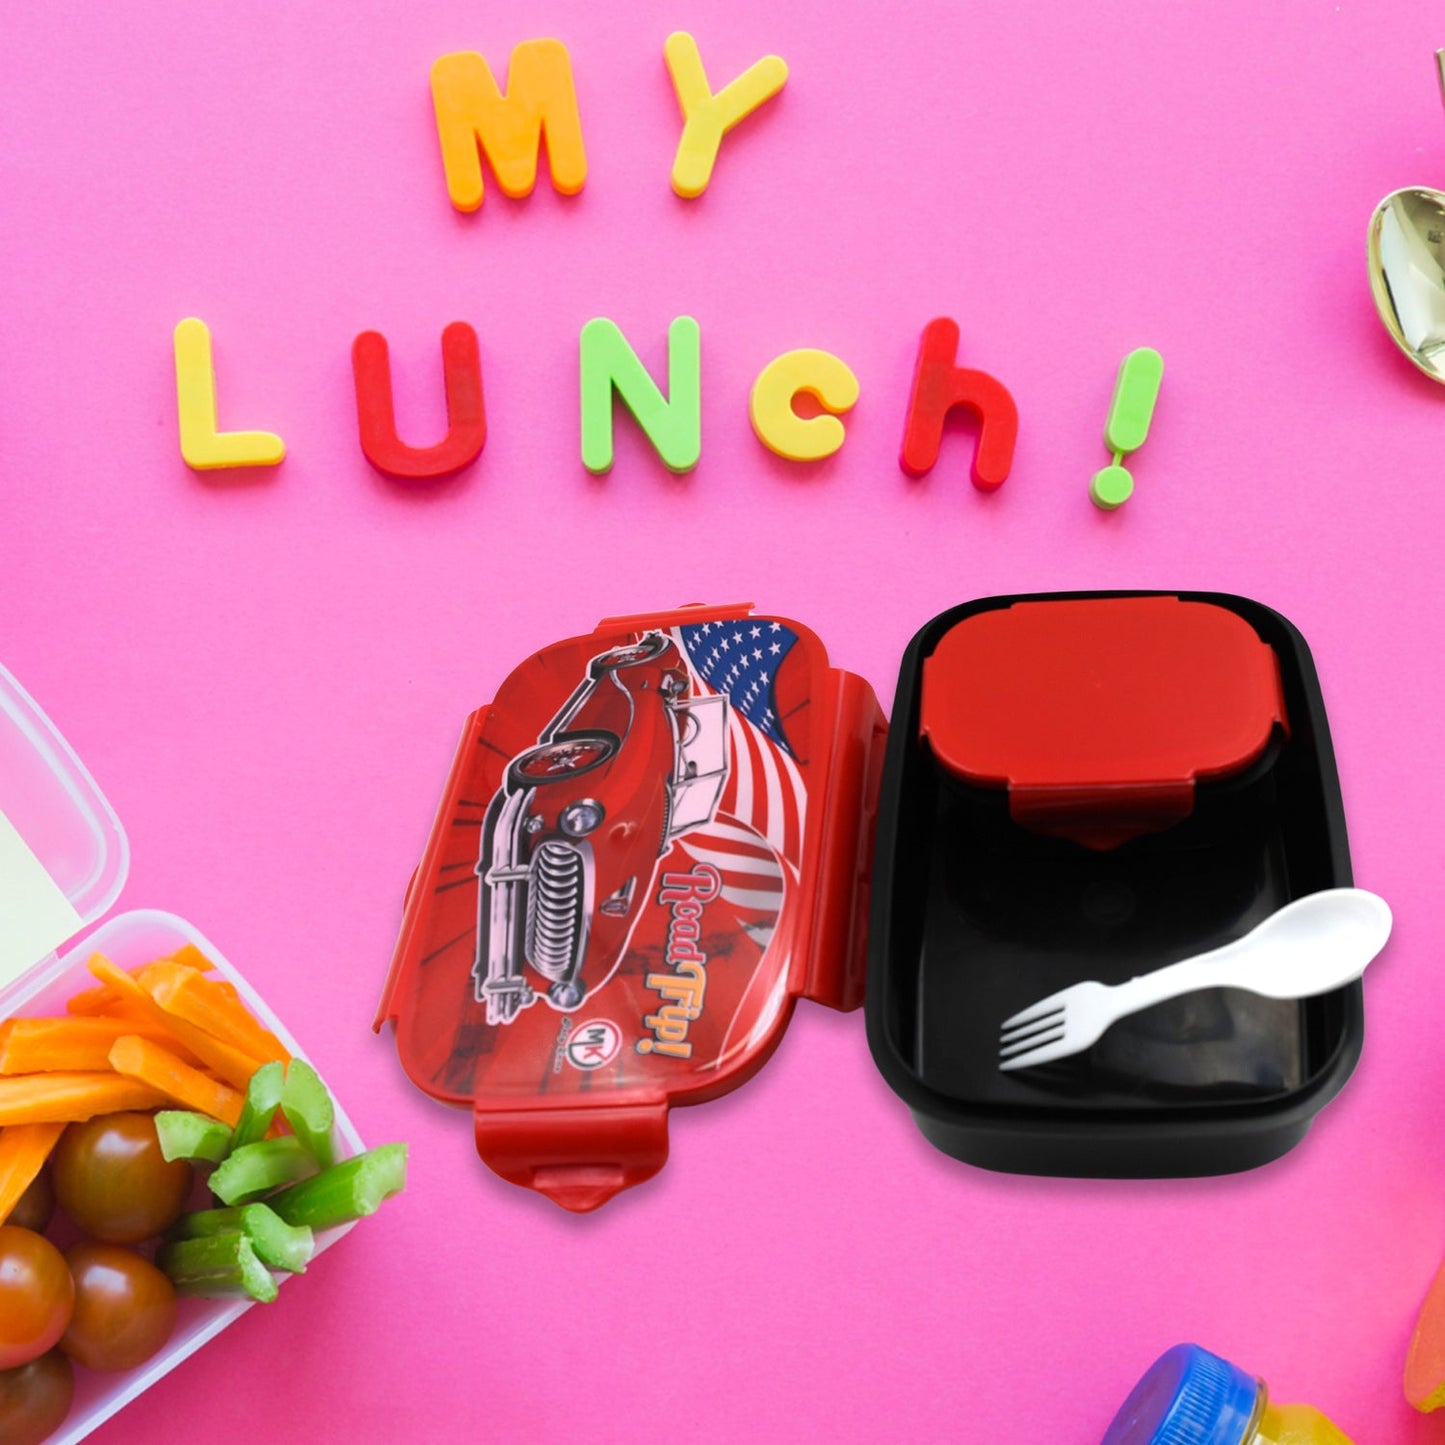 Beautiful Car Design Printed Plastic Lunch Box With Inside Small Box & Spoon for Kids, Air Tight Lunch Tiffin Box for Girls Boys, Food Container, Specially Designed for School Going Boys and Girls